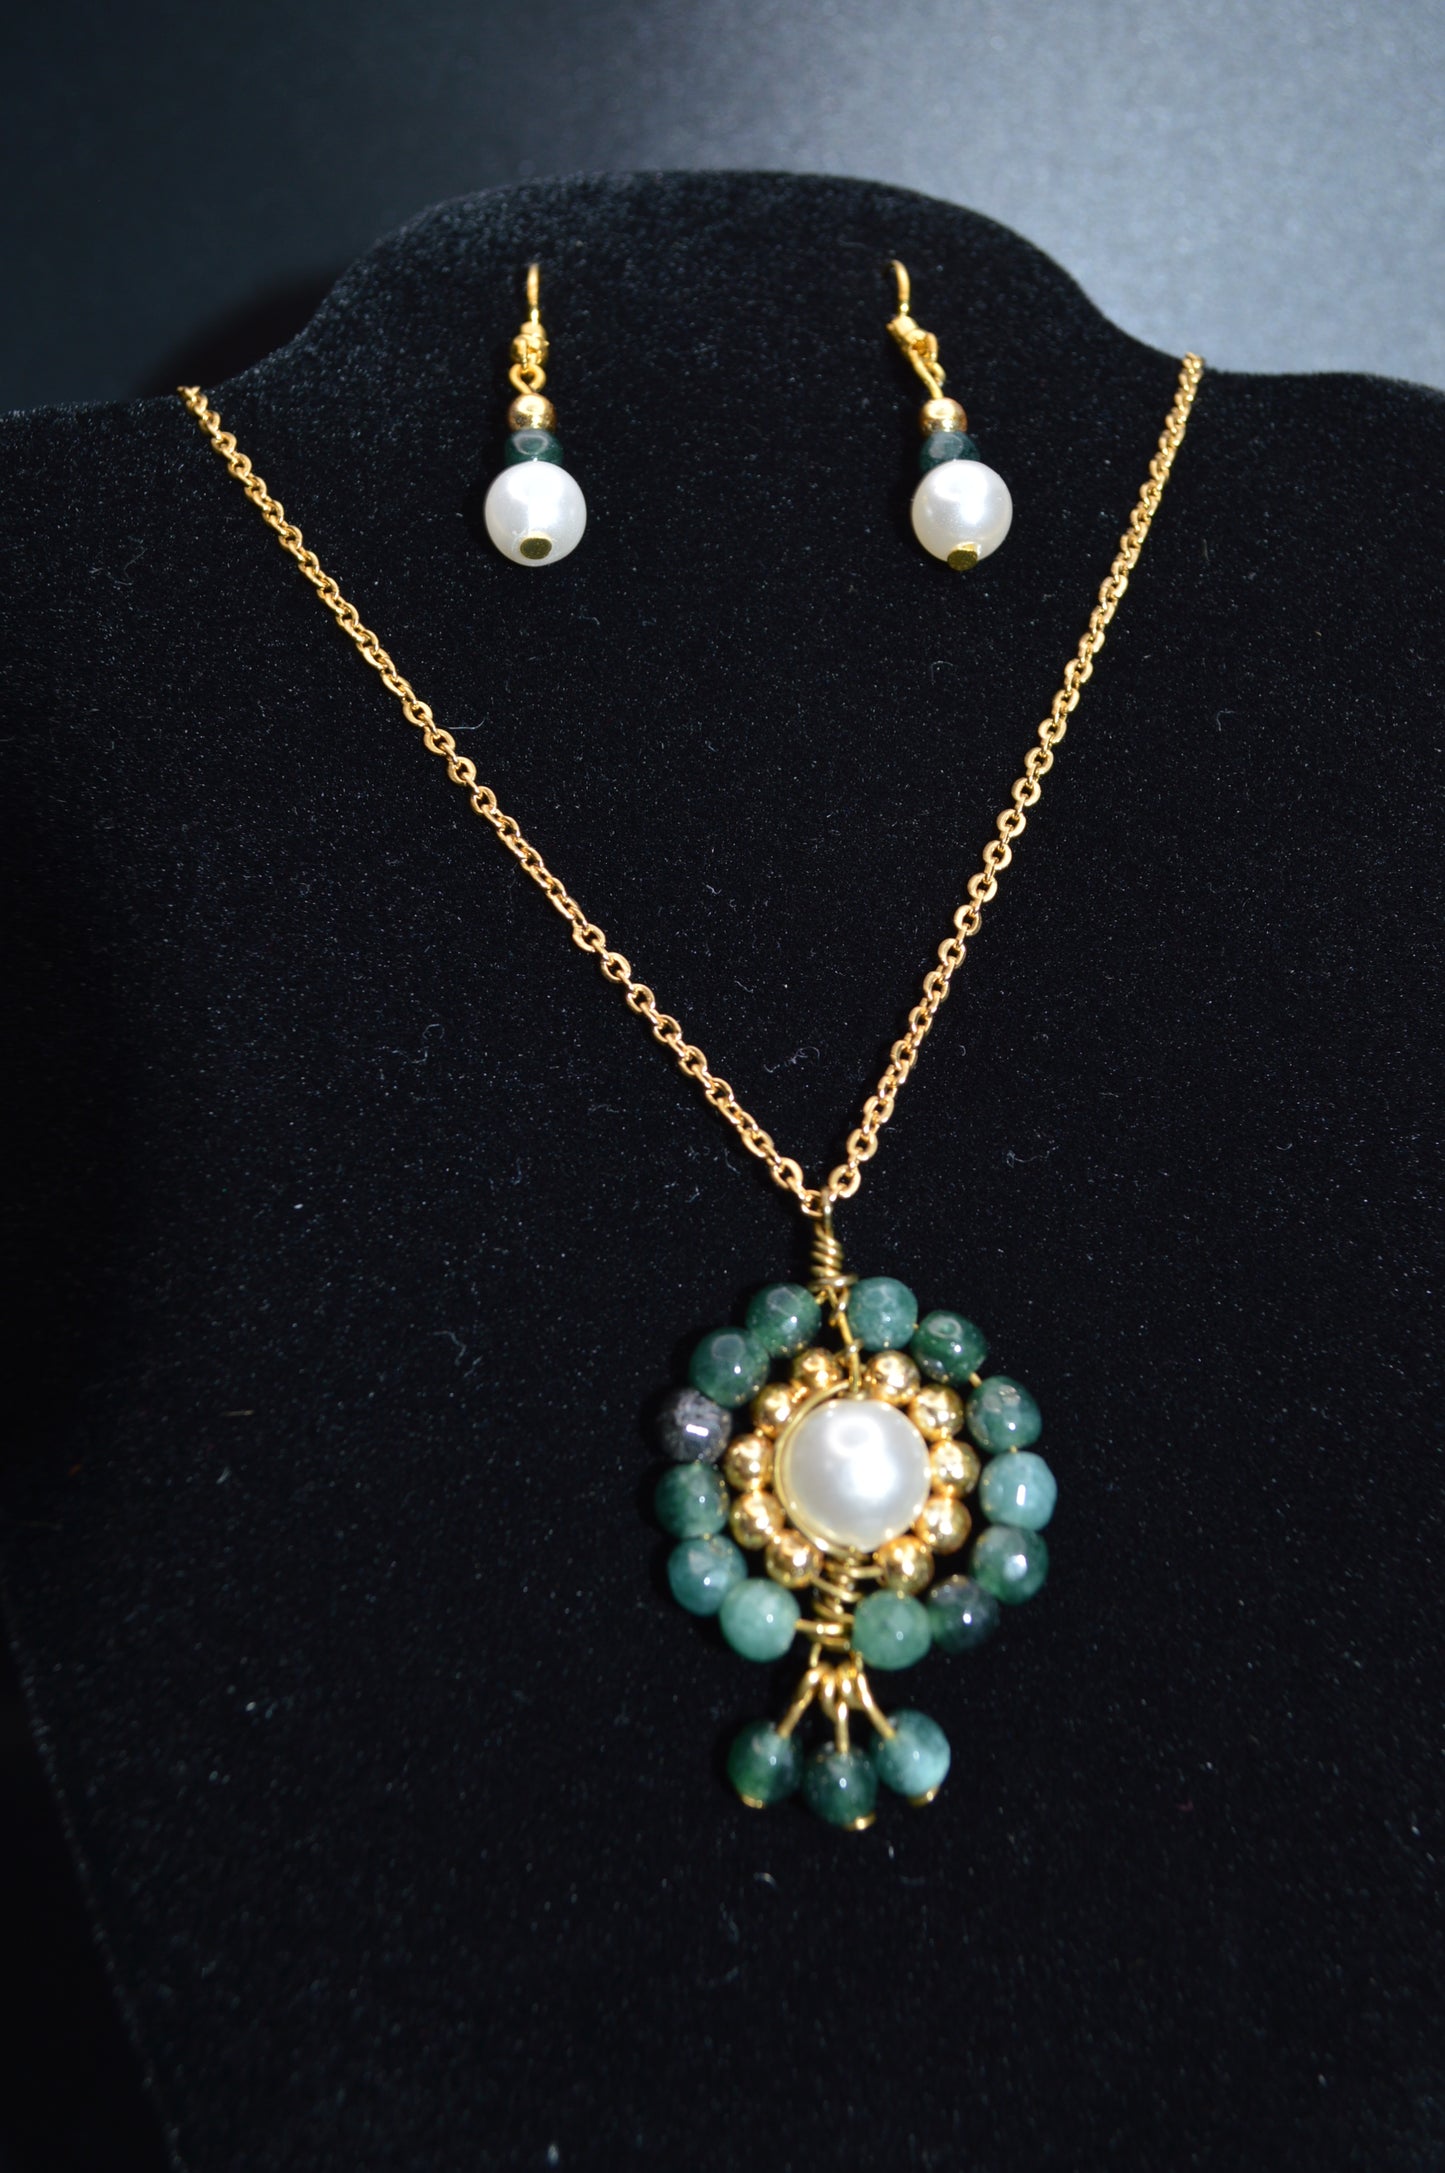 Malaysian Jade Pendant Necklace and Earring Set